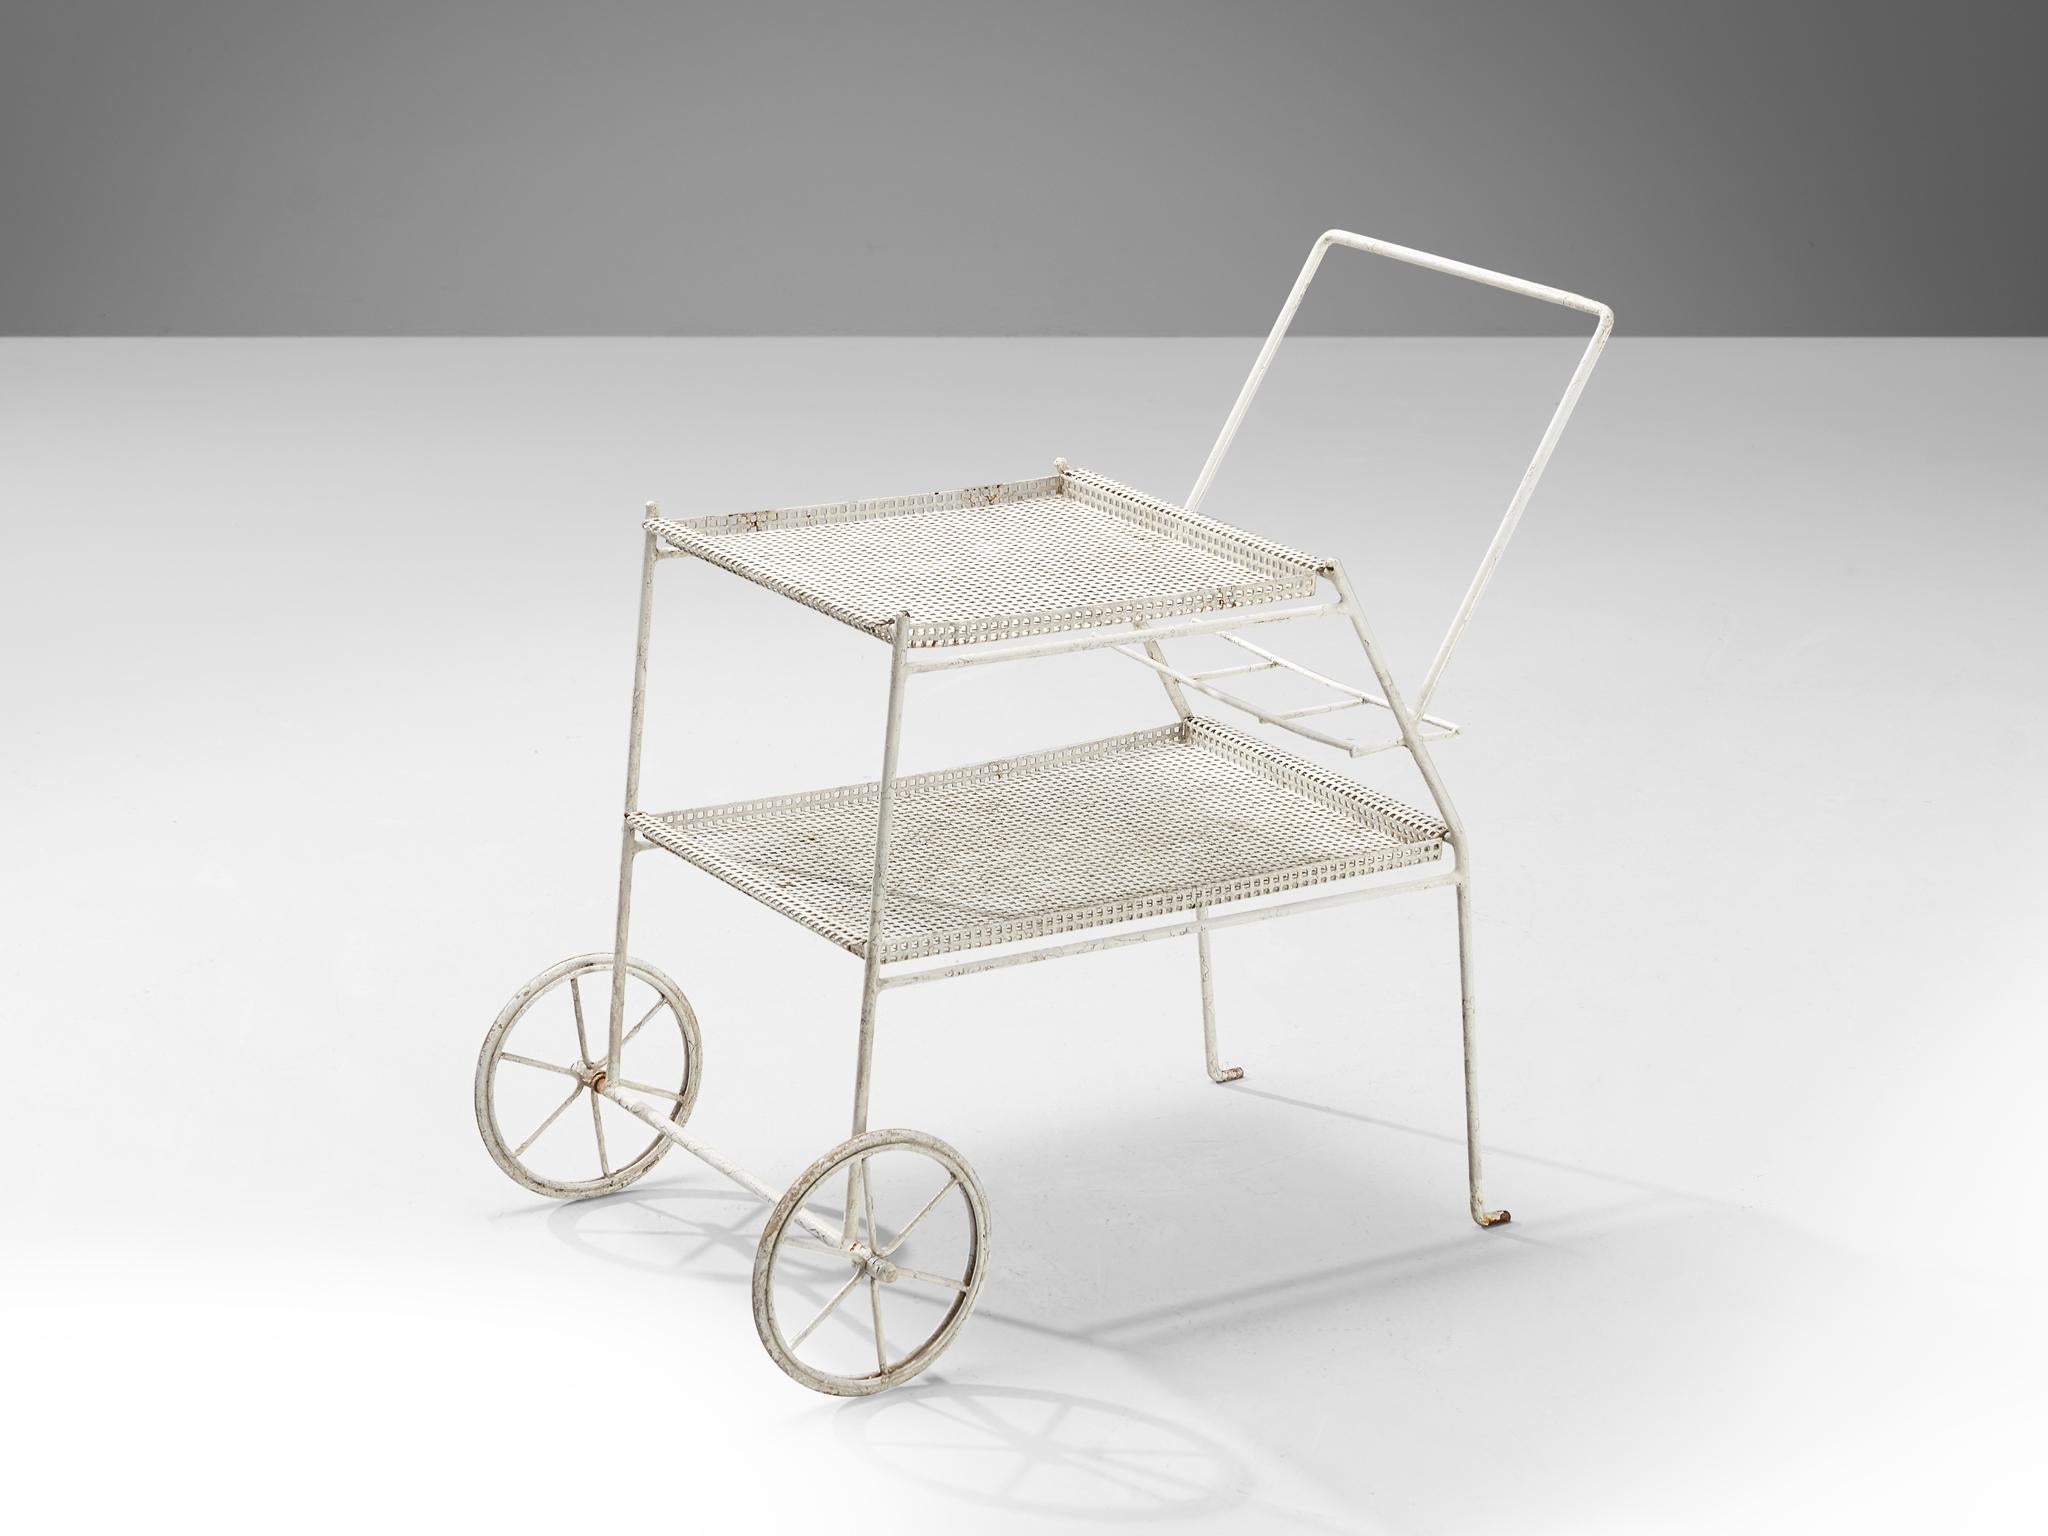 Bar cart, white lacquered iron, France, 1970s

This delicate bar trolley shows similarities with the designs by Mathieu Matégot for Artimeta. The open framework, in combination with the mesh material and the use of only one color enhances its